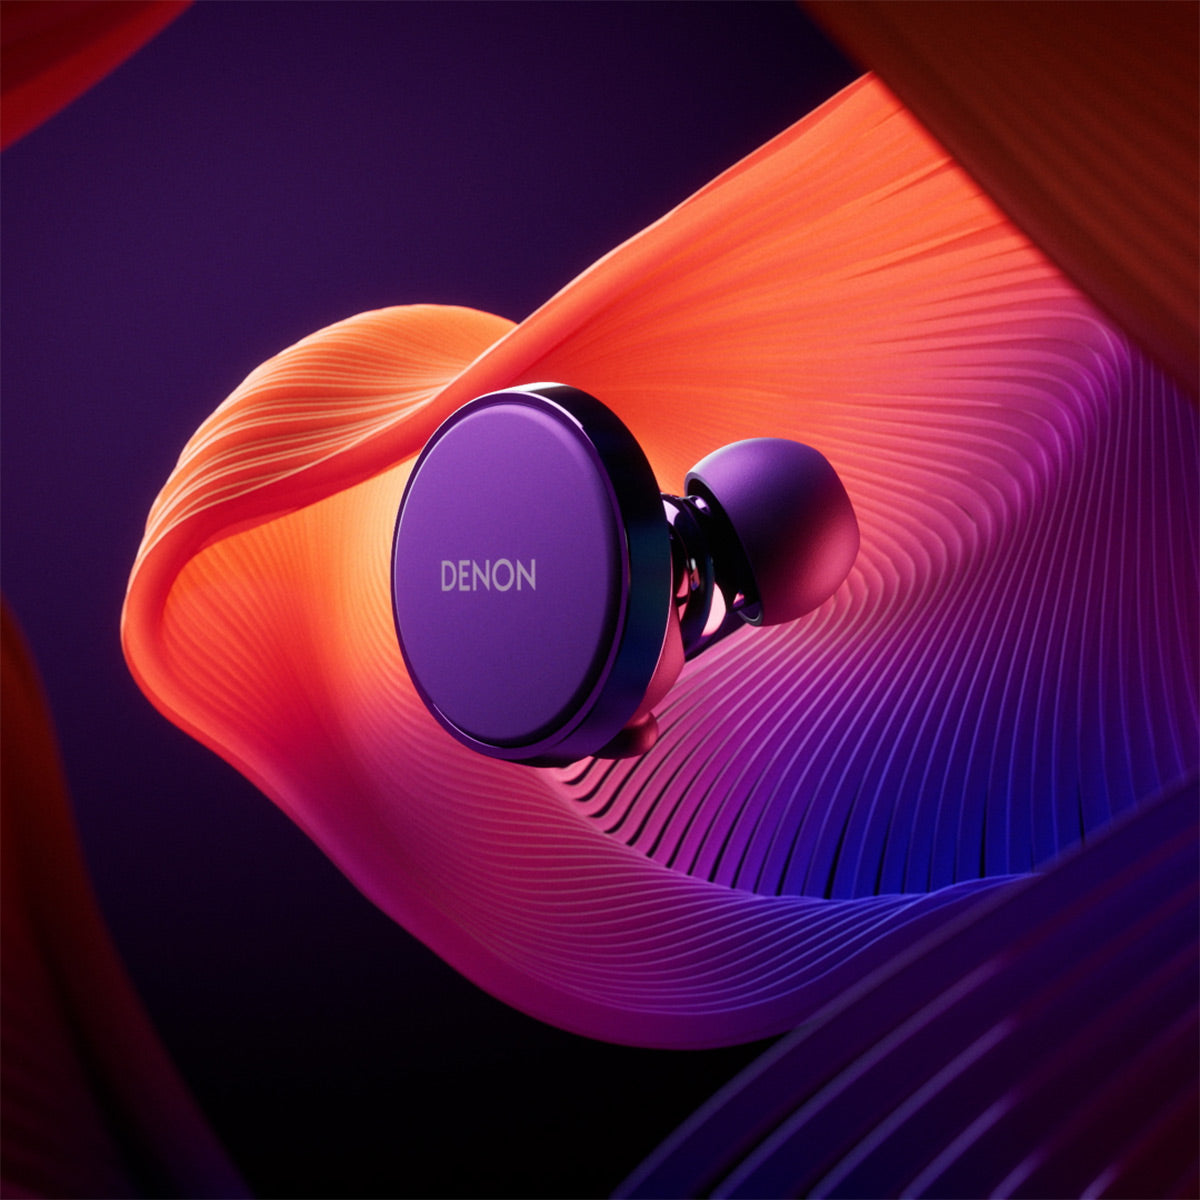 Denon PerL Pro True Wireless Earbuds with Active Noise Cancellation, Spatial Audio, and Adaptive Acoustic Technology